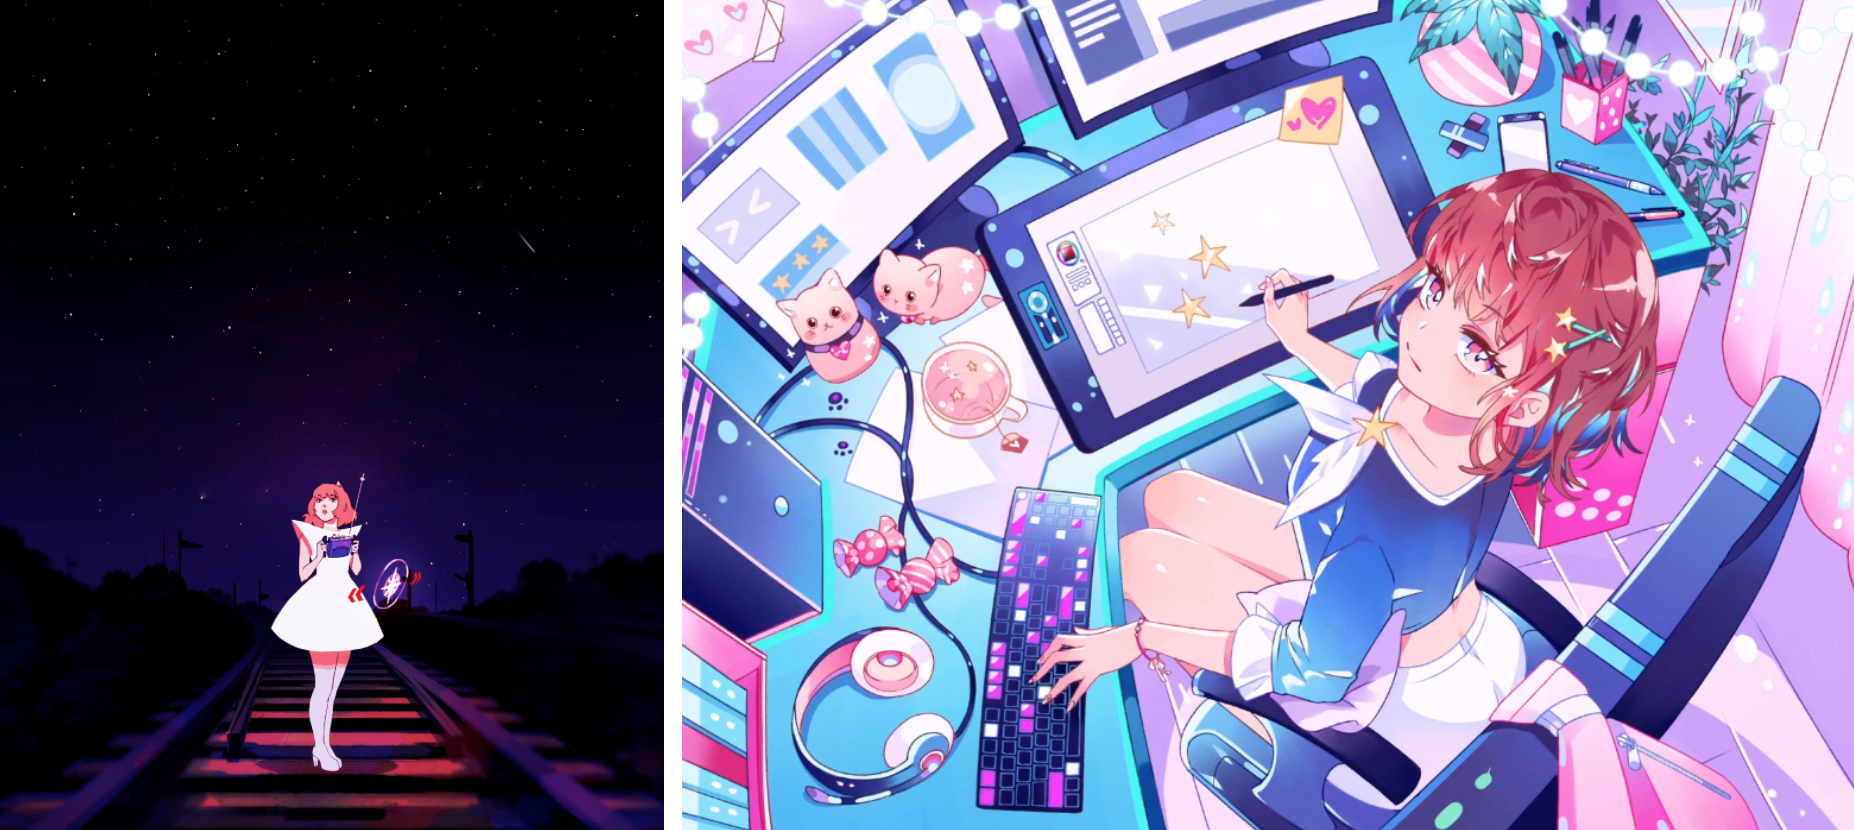 Left: Starseeker by Jessica Luna Right: Drawing star by LatenightOT